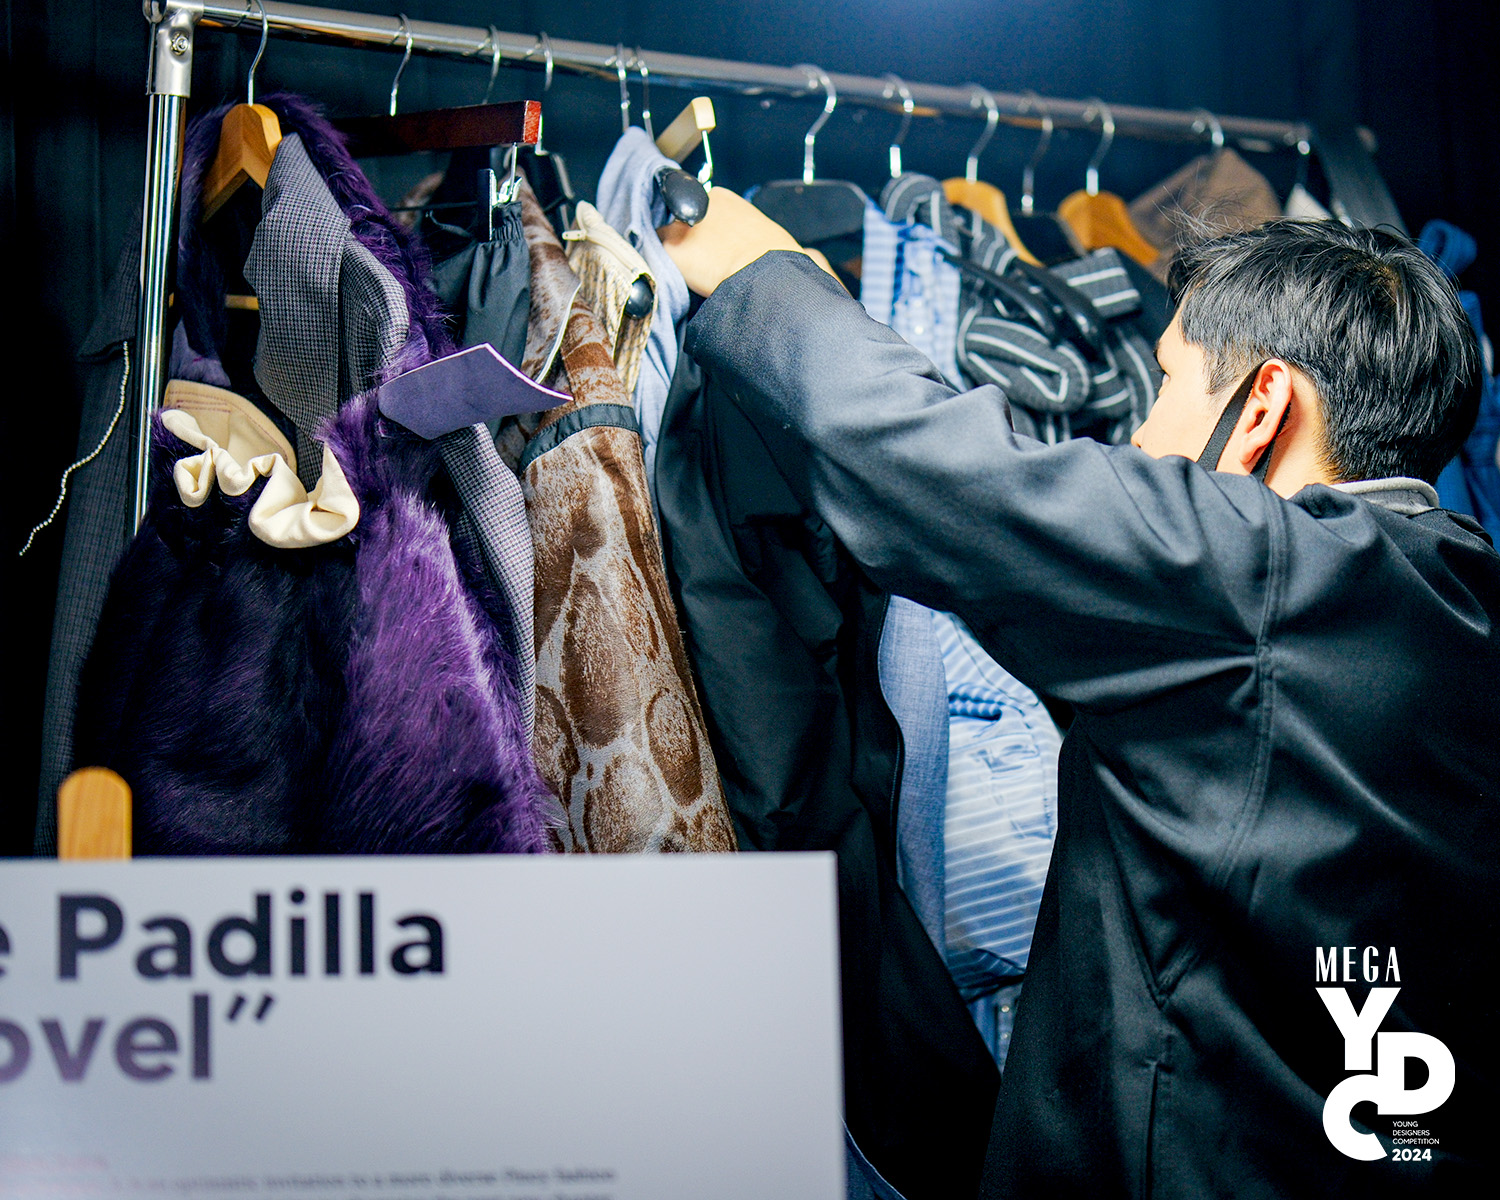 MEGA Young Designers Competition event highlights Prince Padilla backstage collection Novel